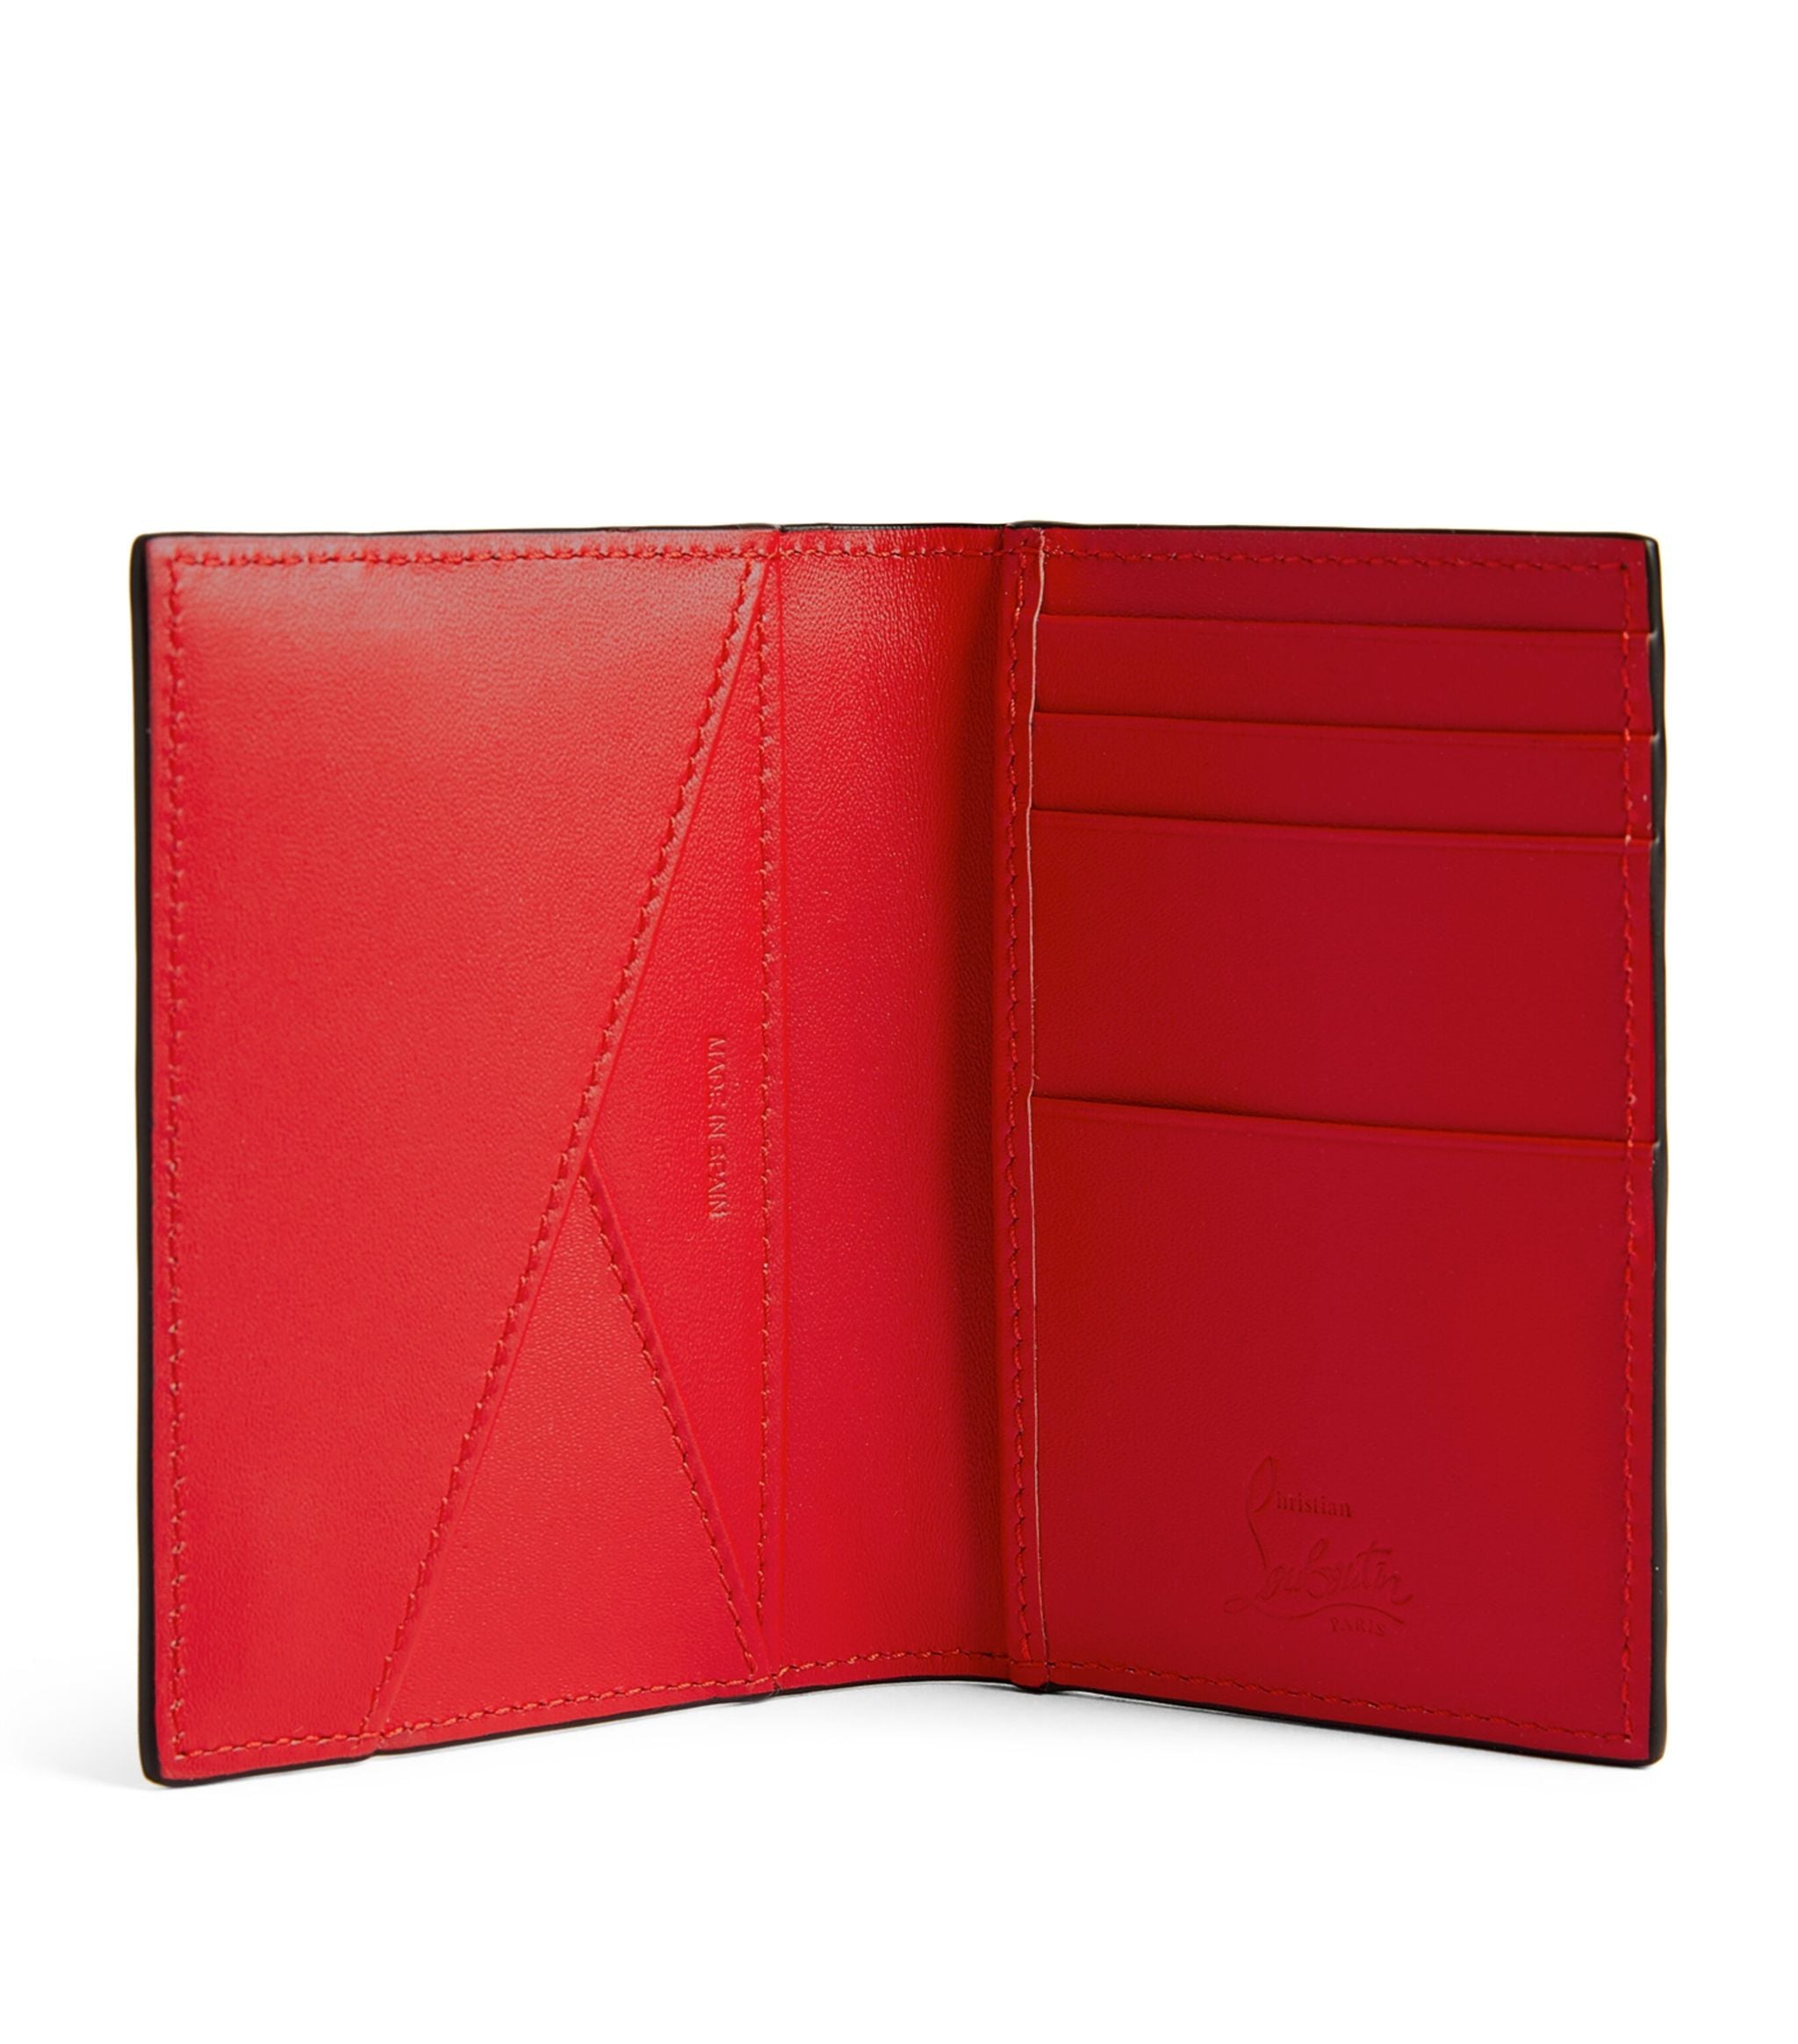 Signos Perforated Leather Wallet GOODS Harrods   